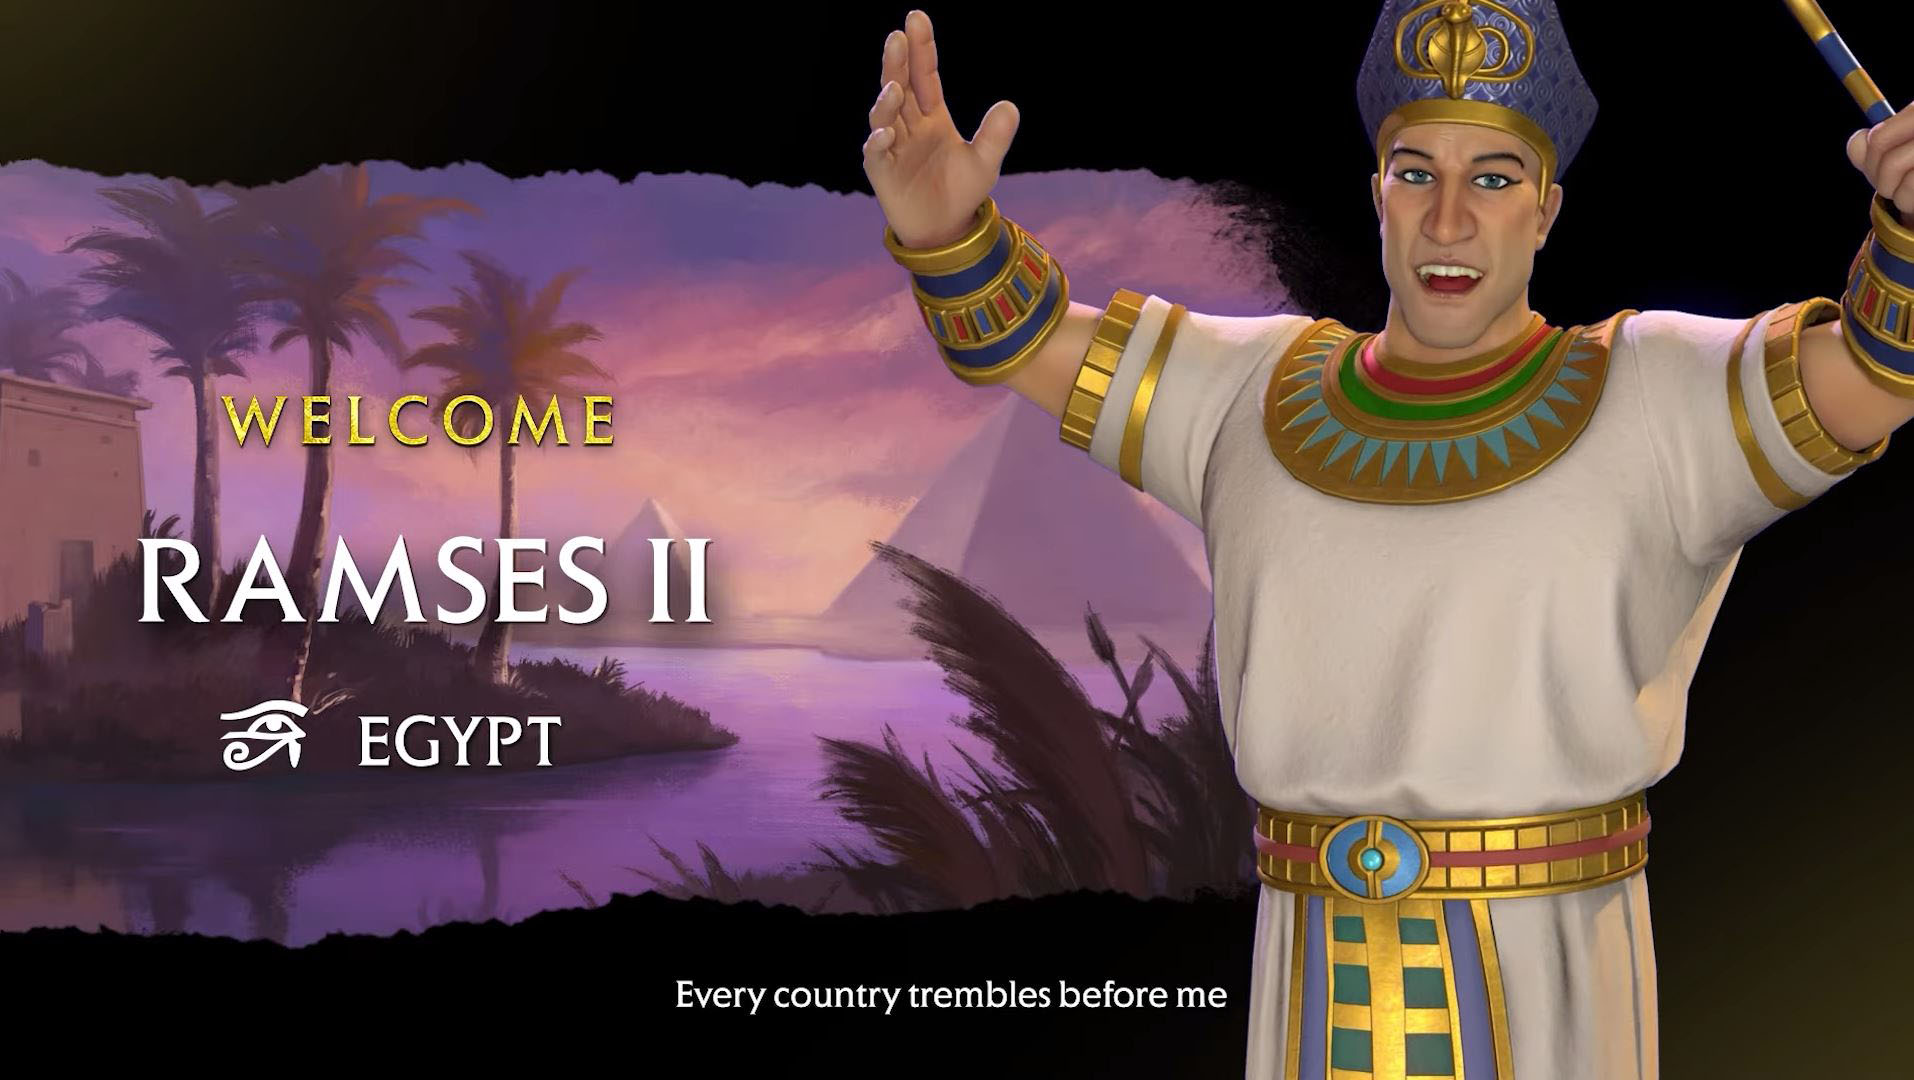 Civilization VI Rulers of the Sahara DLC Pack available now